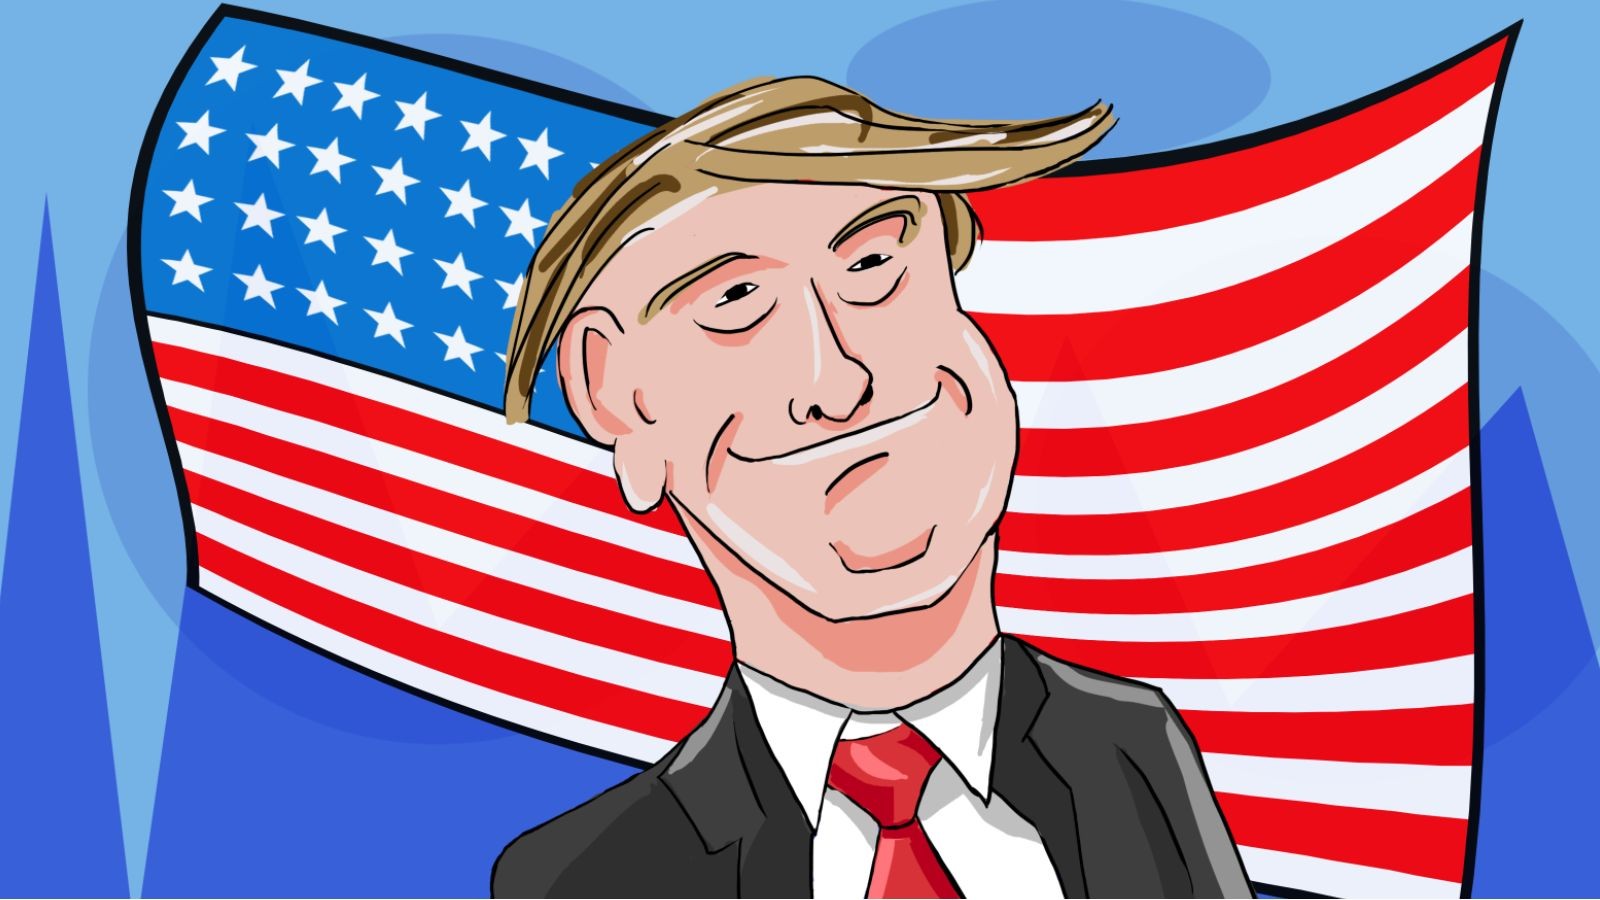 Donald Trump Cartoon Caricature Presidents American Flag Suits Stars And Stripes MAGA 1600x900